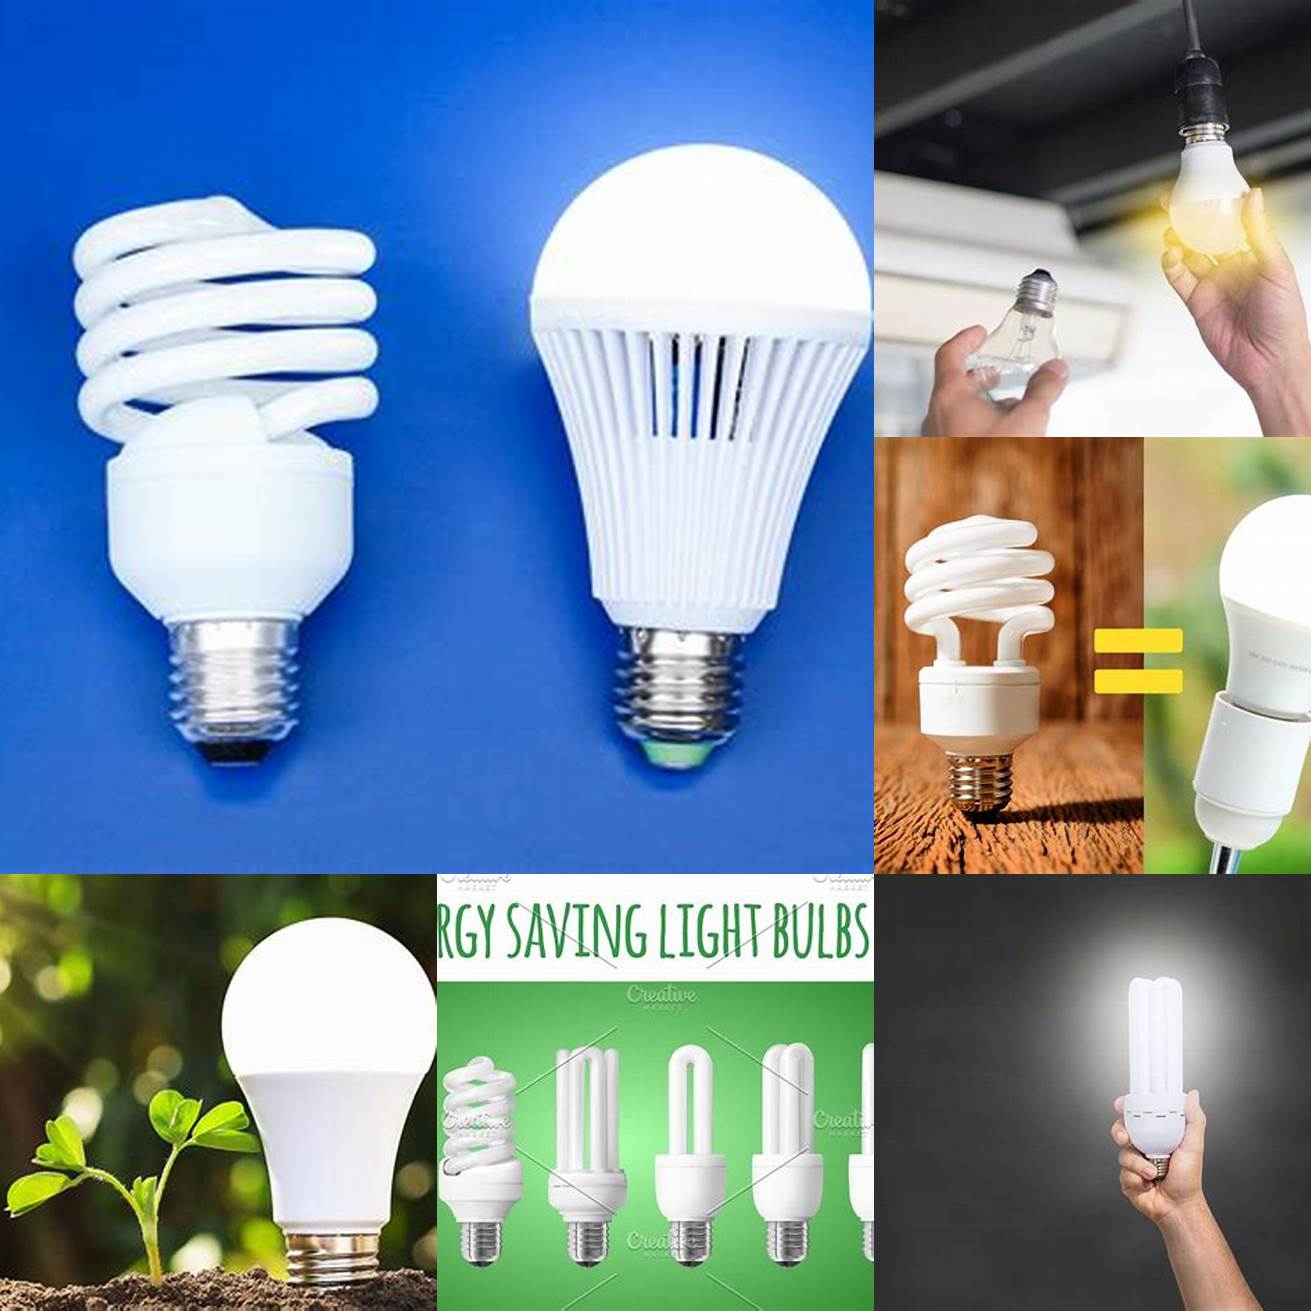 The energy-efficient bulbs save on electricity bills making it an environmentally friendly choice